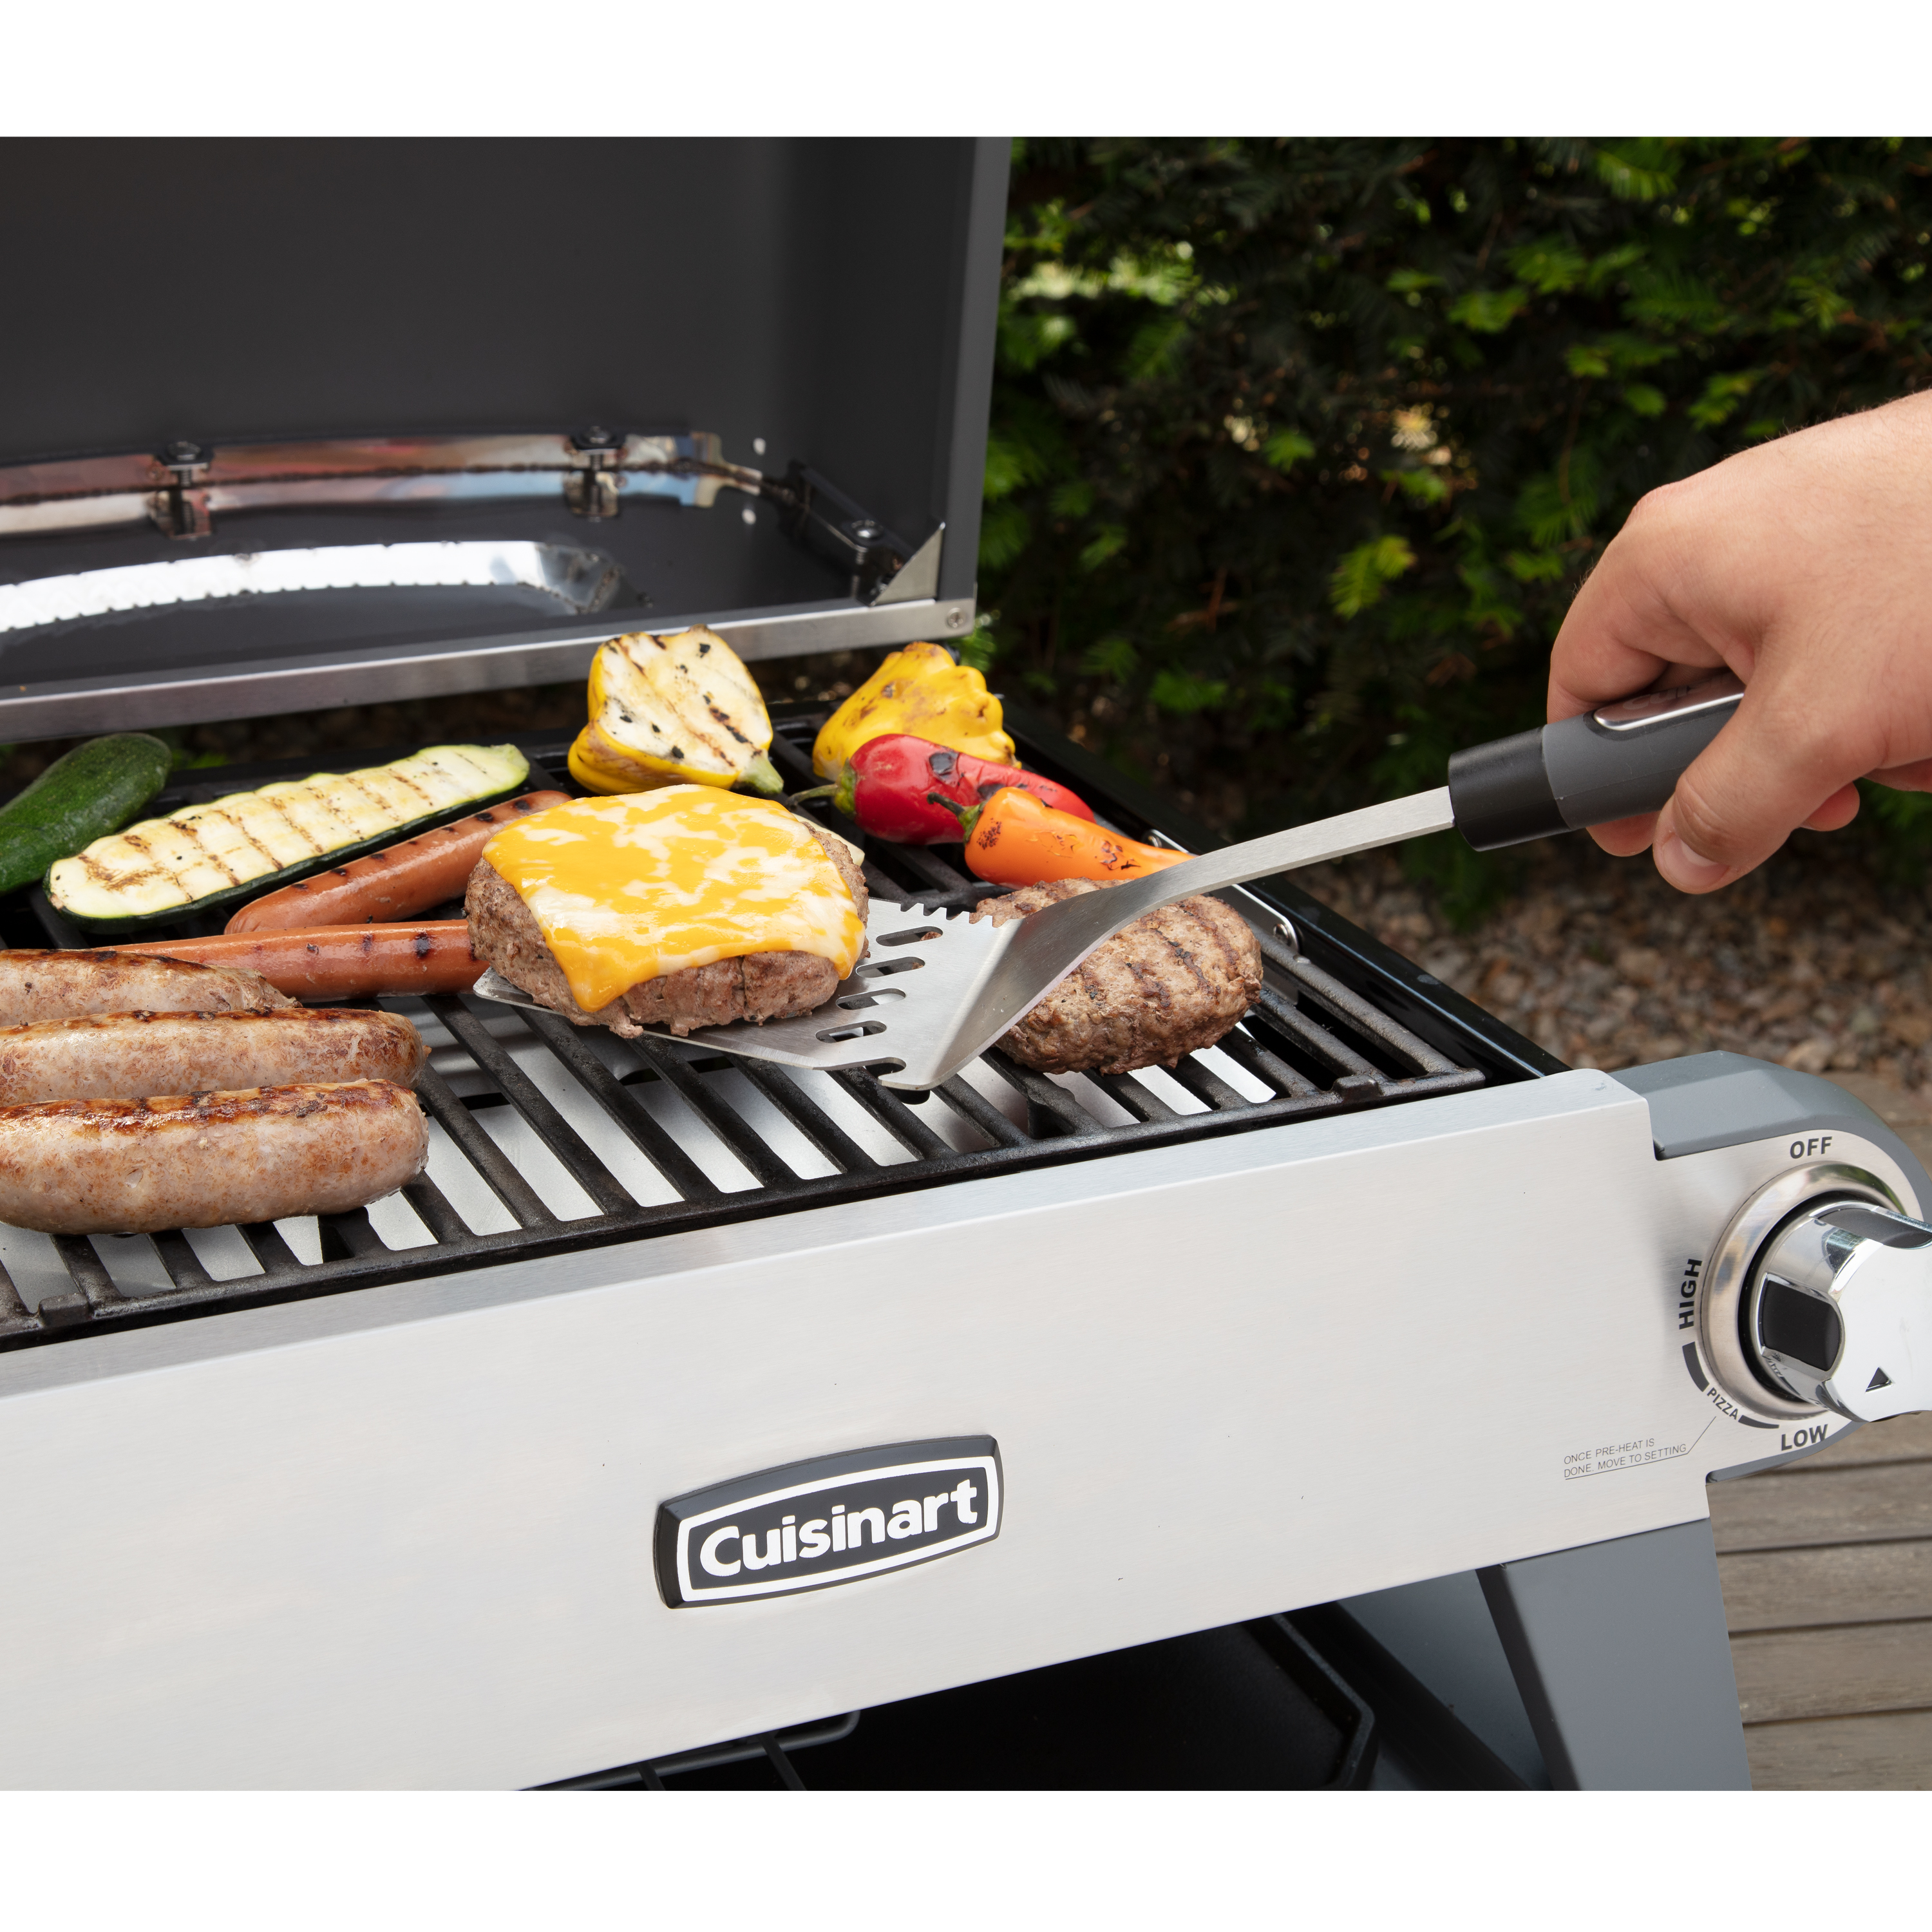 Cuisinart 3-in-1 Pizza Oven, Griddle, and Grill - image 5 of 11